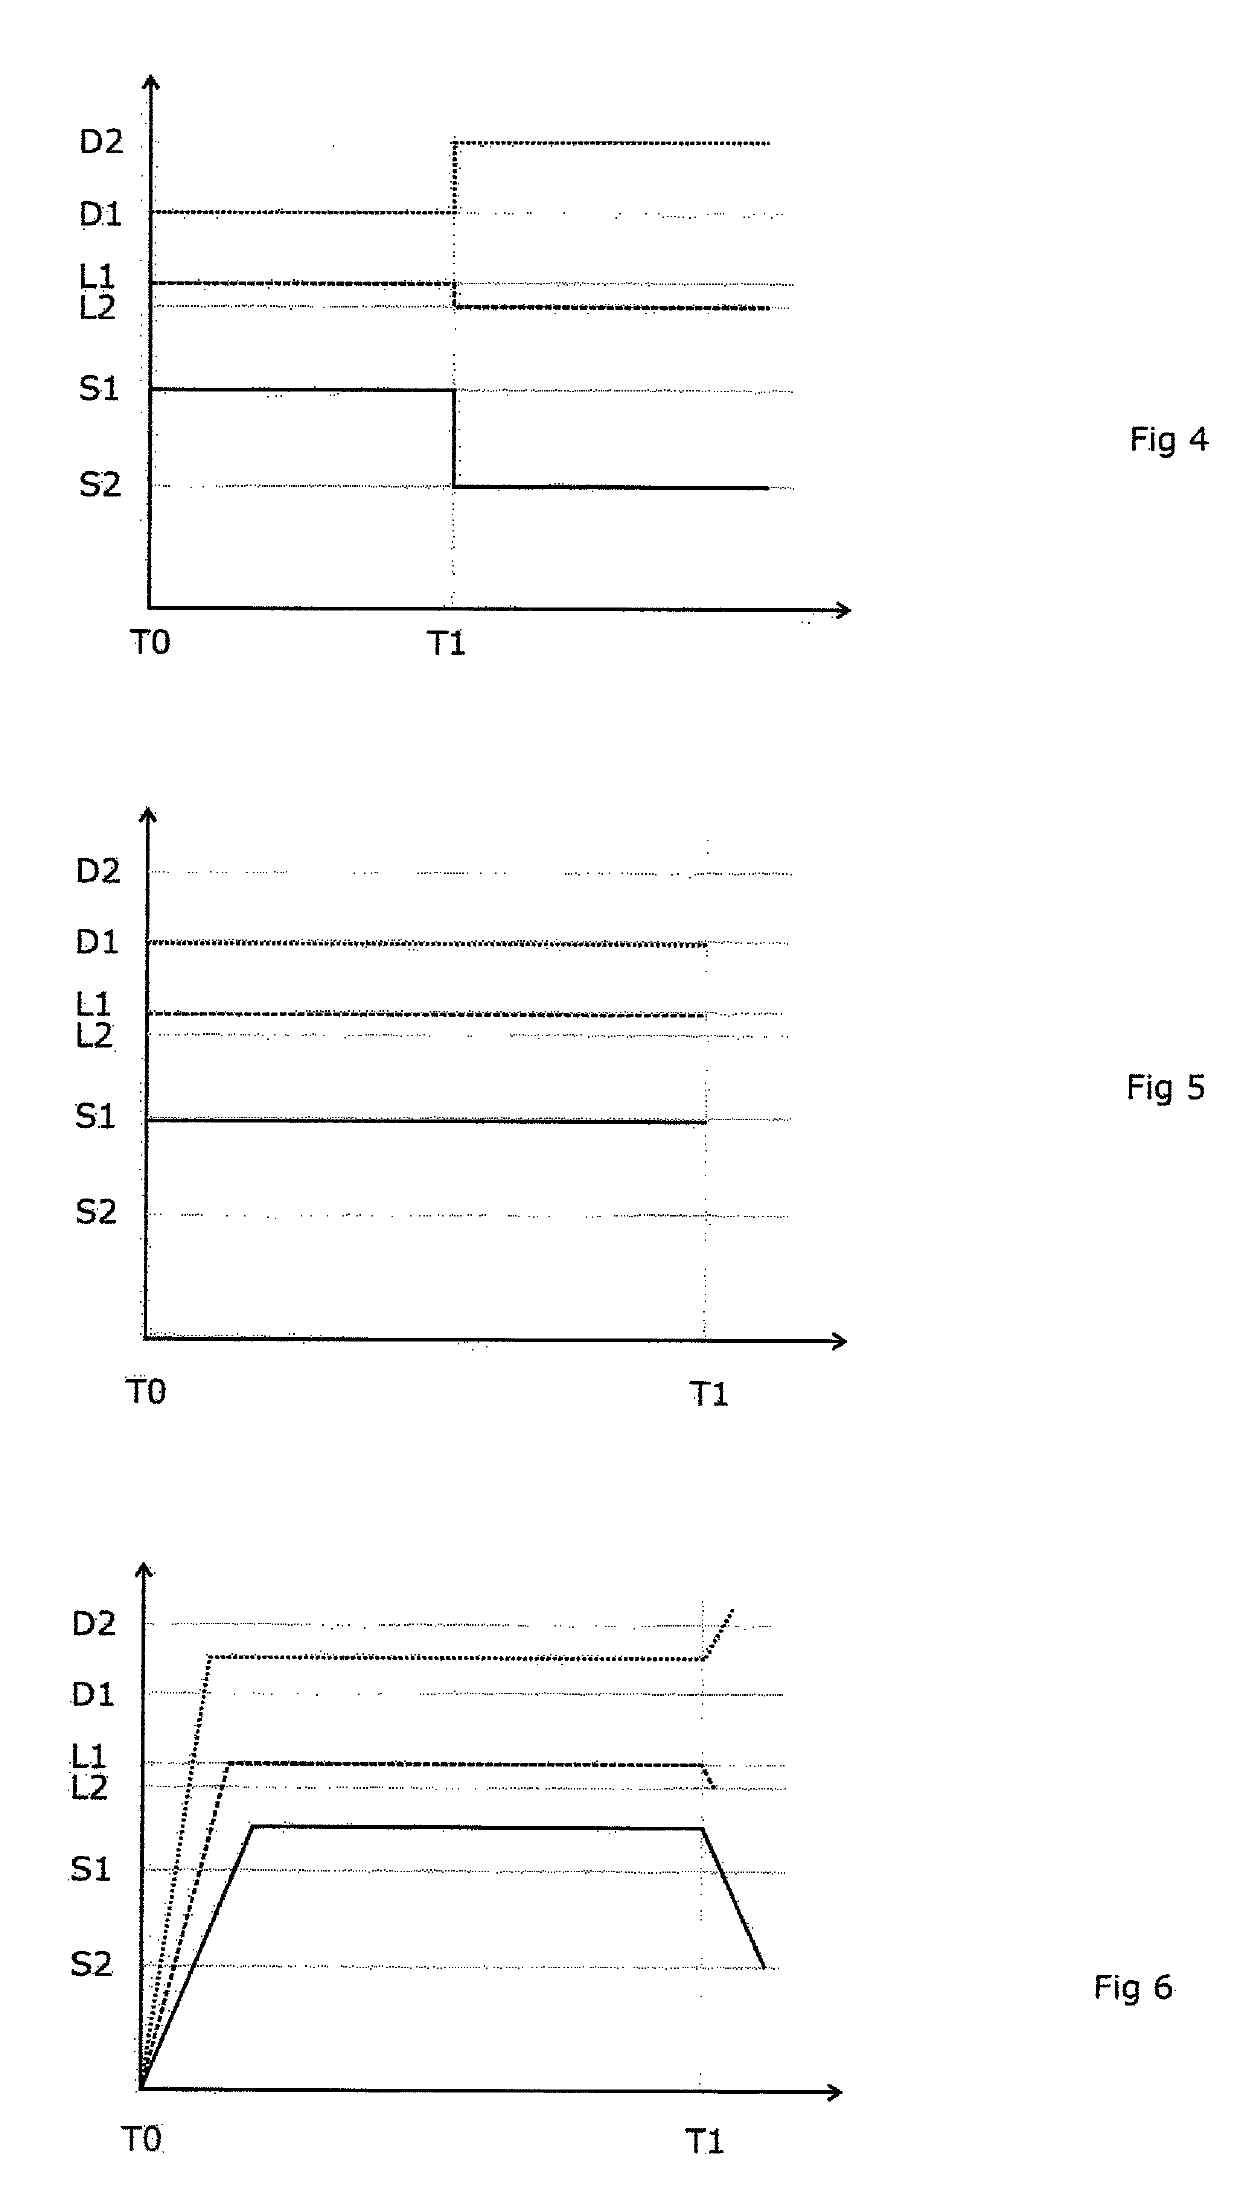 Radiotherapy apparatus using inertial characteristics for delivery planning